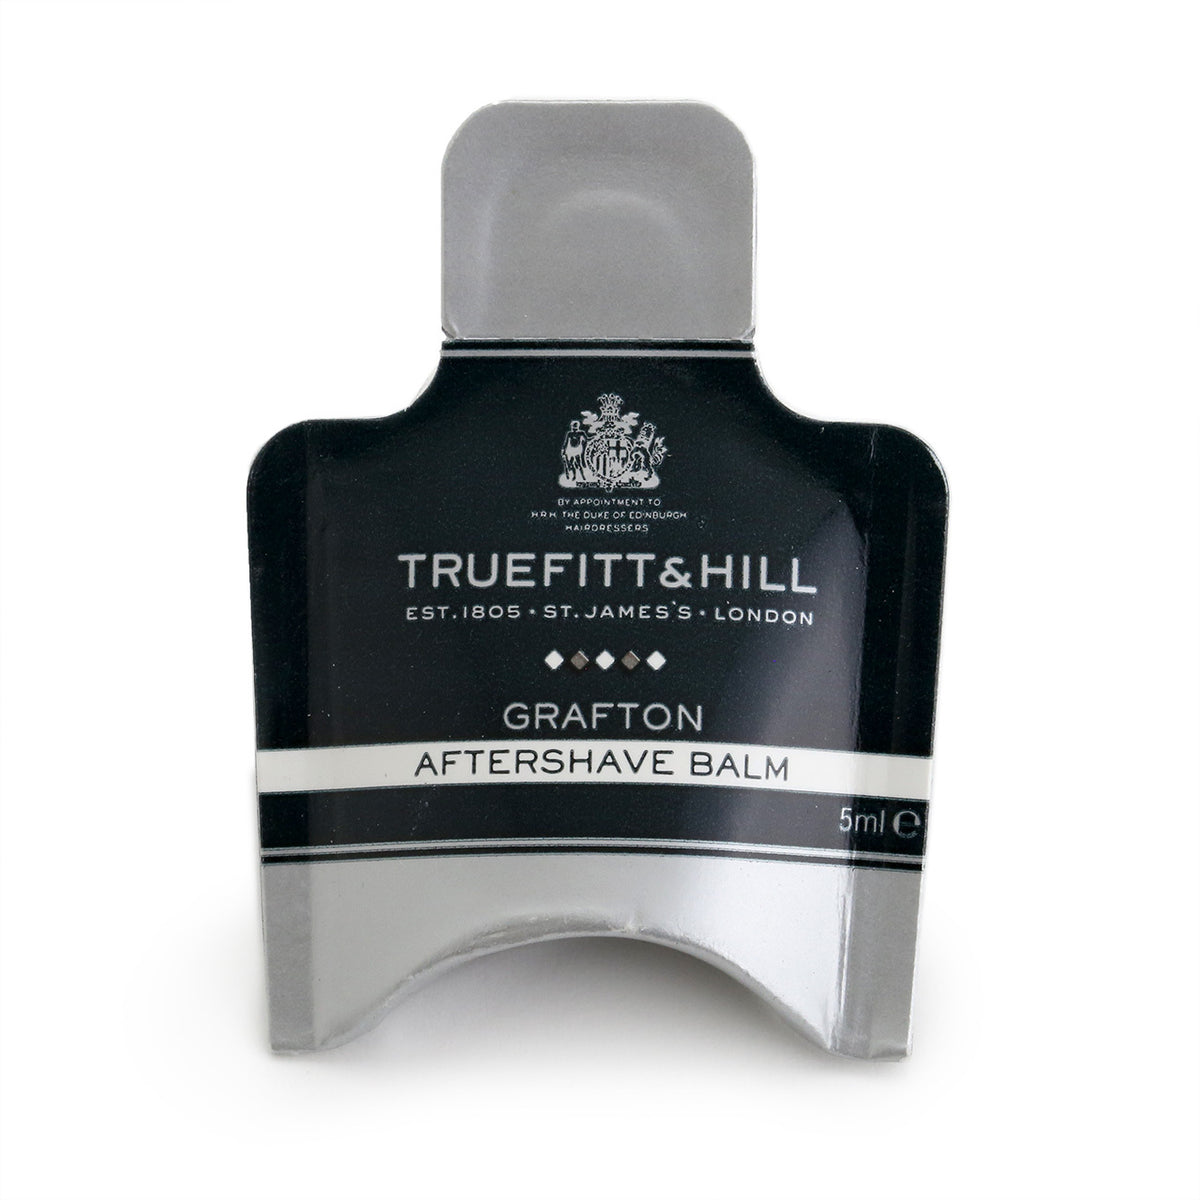 Grafton Aftershave Balm Sample 5ml